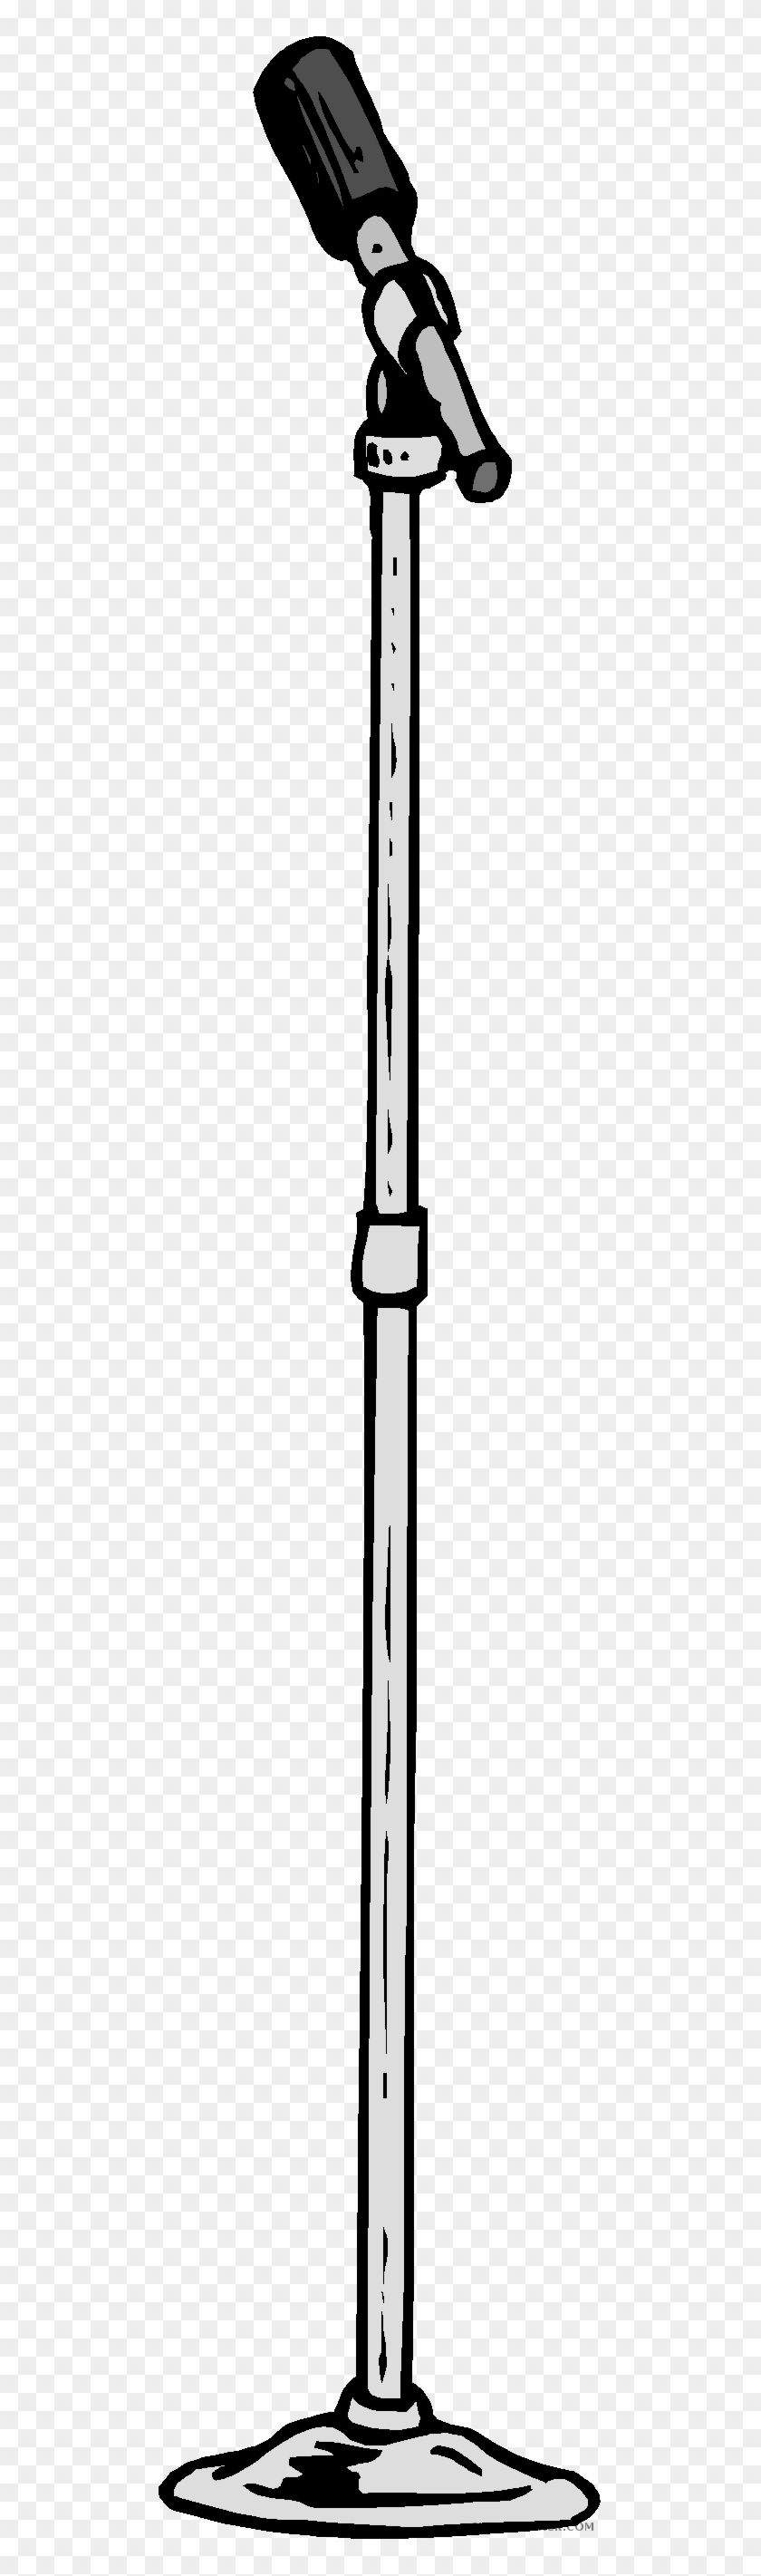 Microphone Stand Tools Free Black White Clipart Images - Microphone Stand Clipart Png #1046060